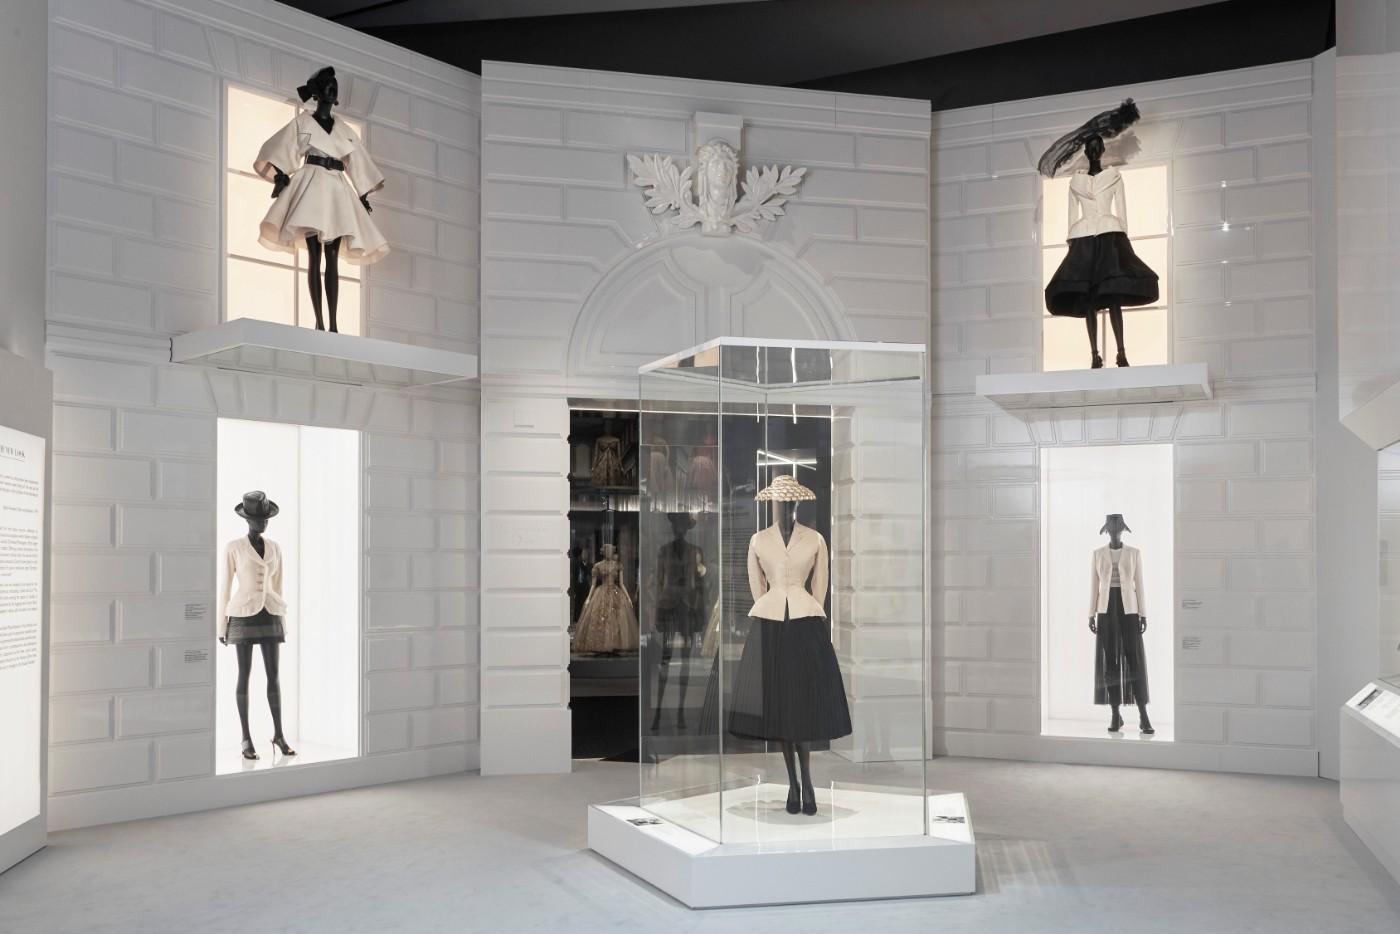 The V&A's Christian Dior Designer of Dreams exhibition, The New Look section